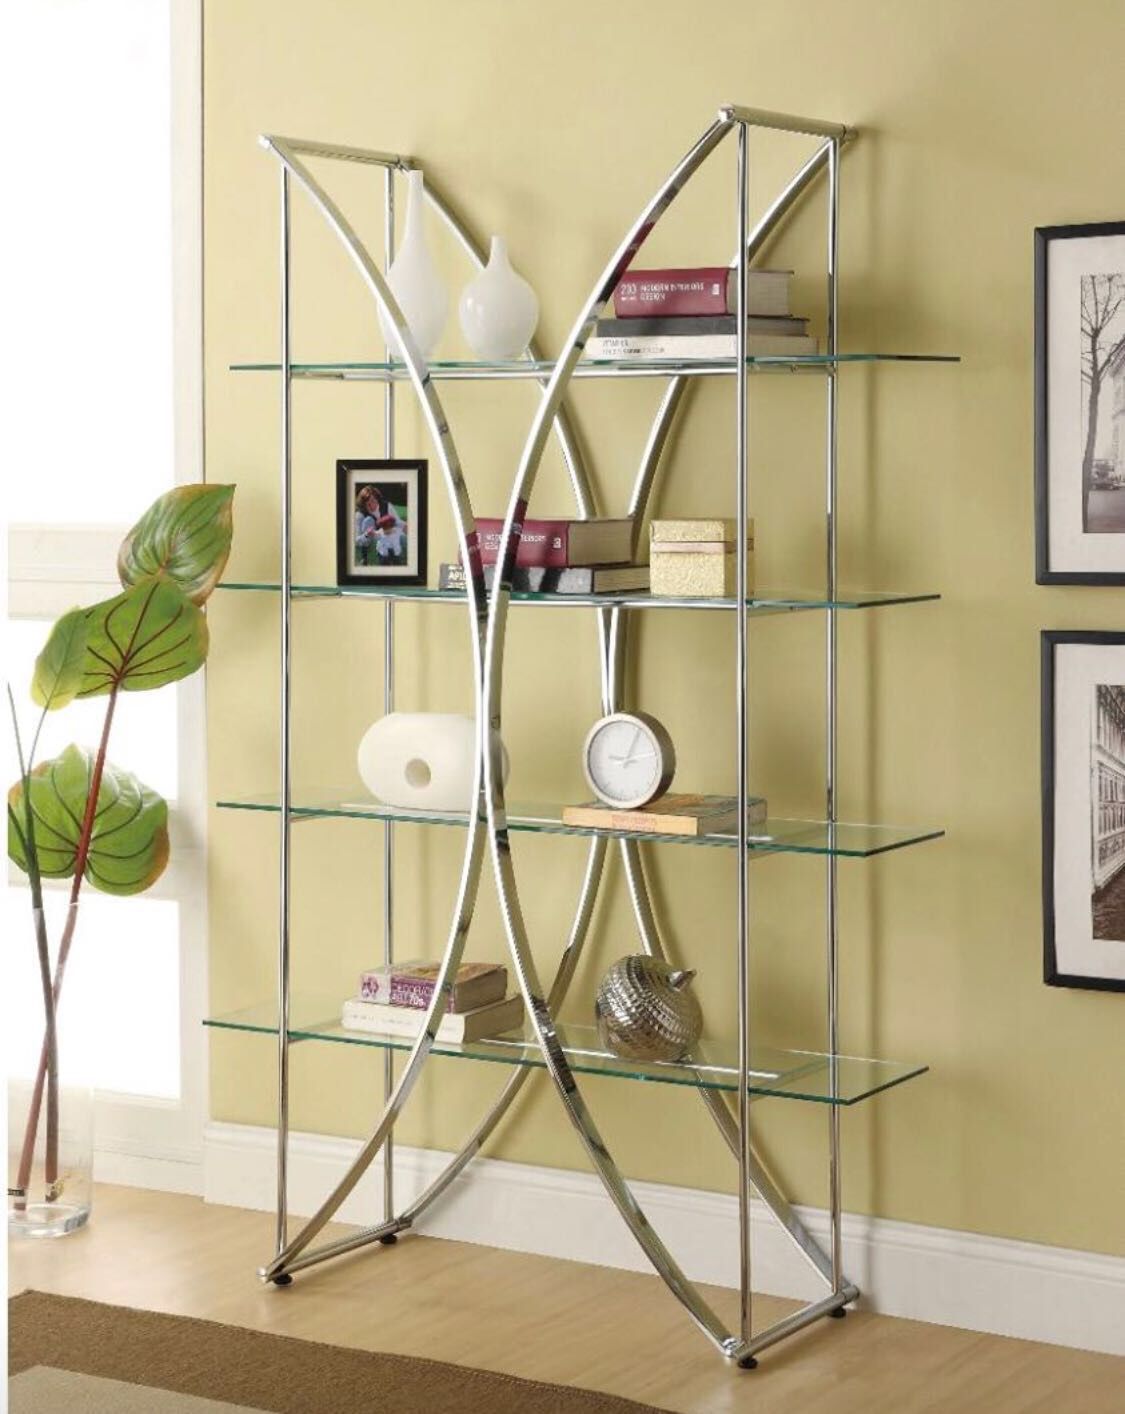 Brand New Coaster Company Chrome Etagere with Tempered Glass Shelves